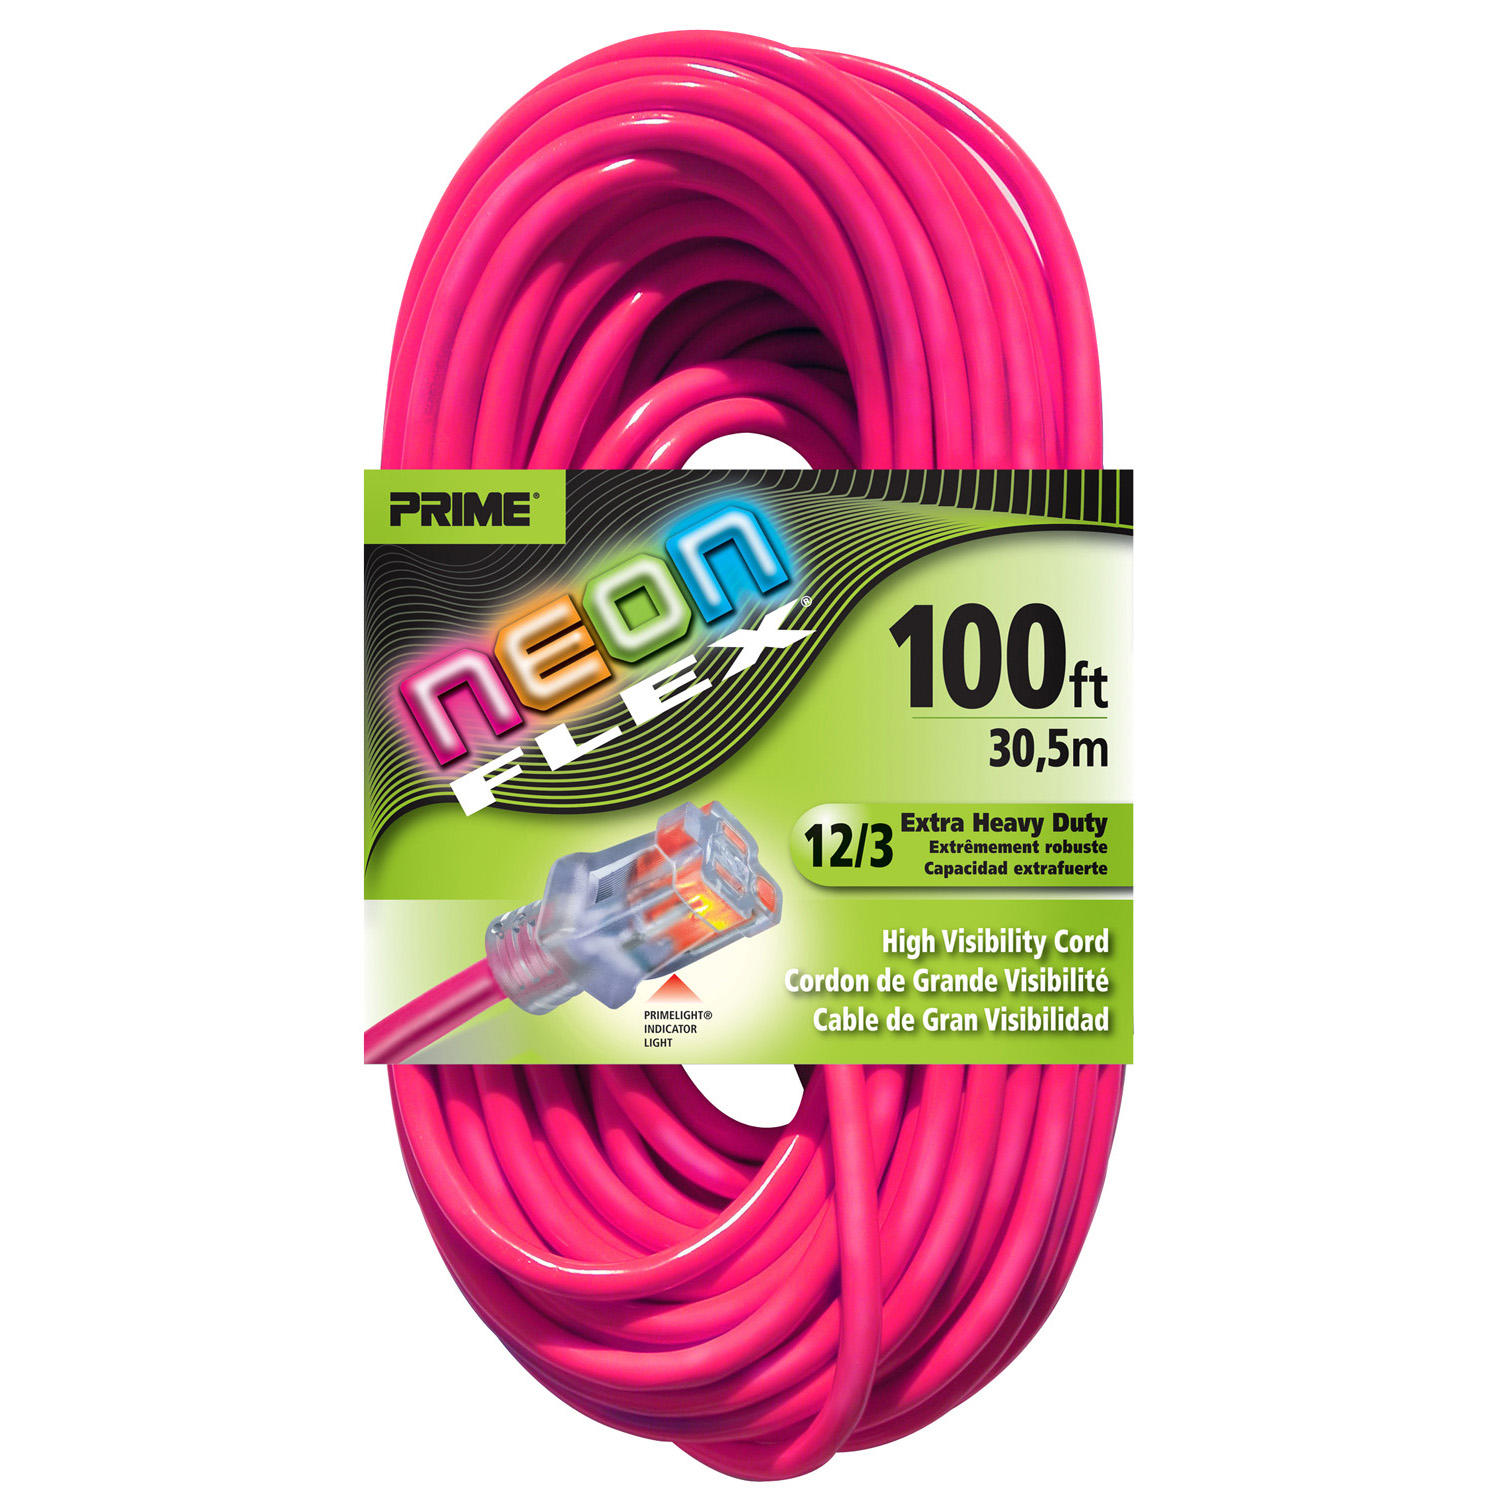 NS513835 100-Foot Neon Flex High Visibility Outdoor Cord With Indicator Light